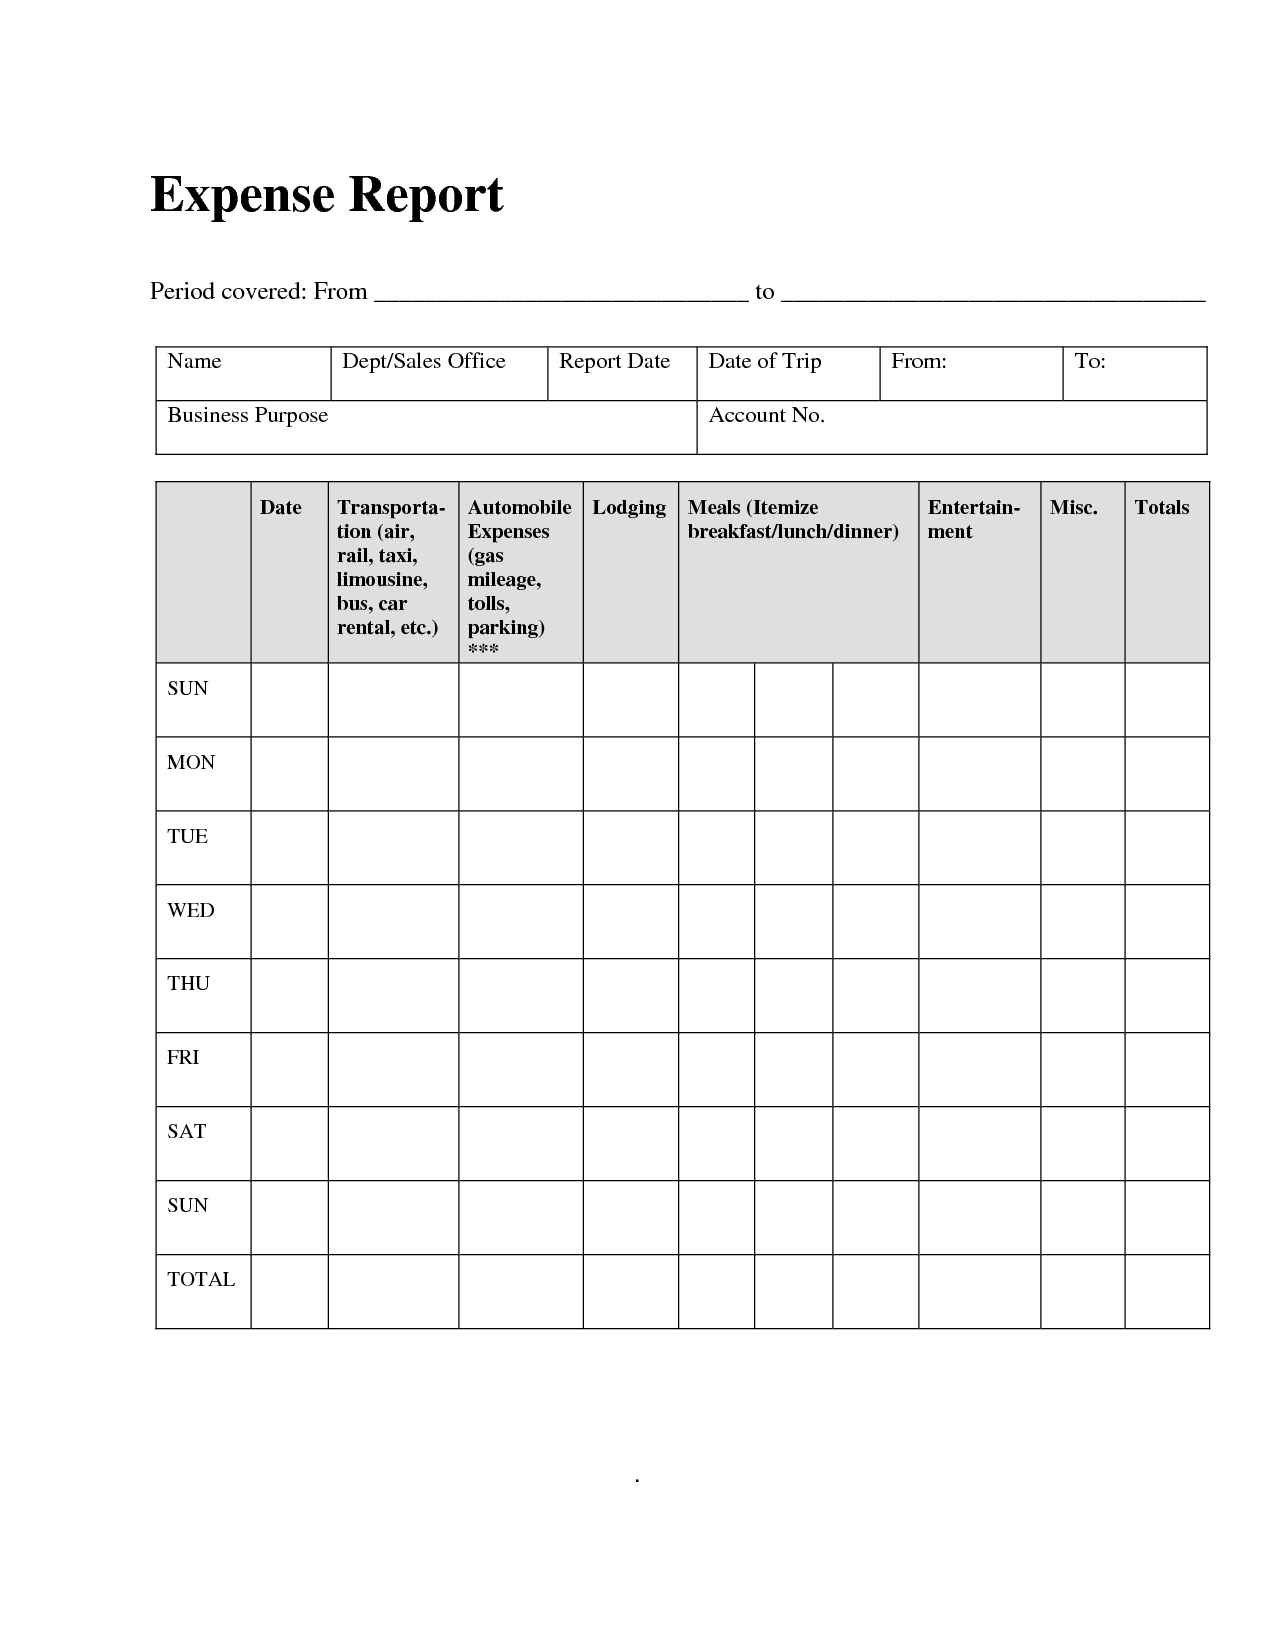 simple-expense-form-spreadsheet-templates-for-busines-expense-report